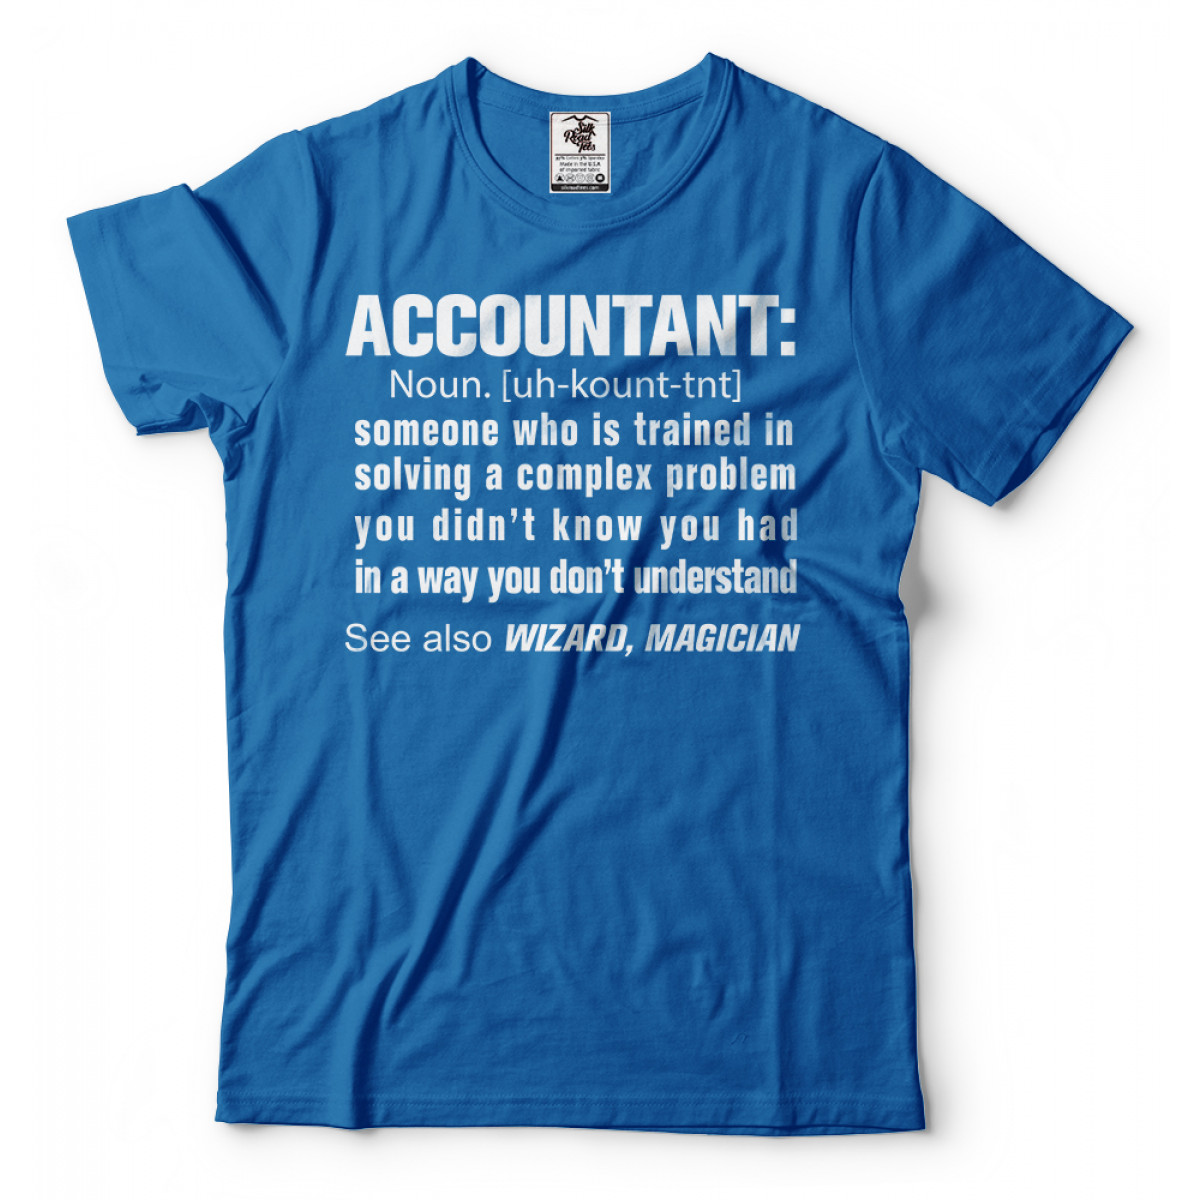 different accounting careers